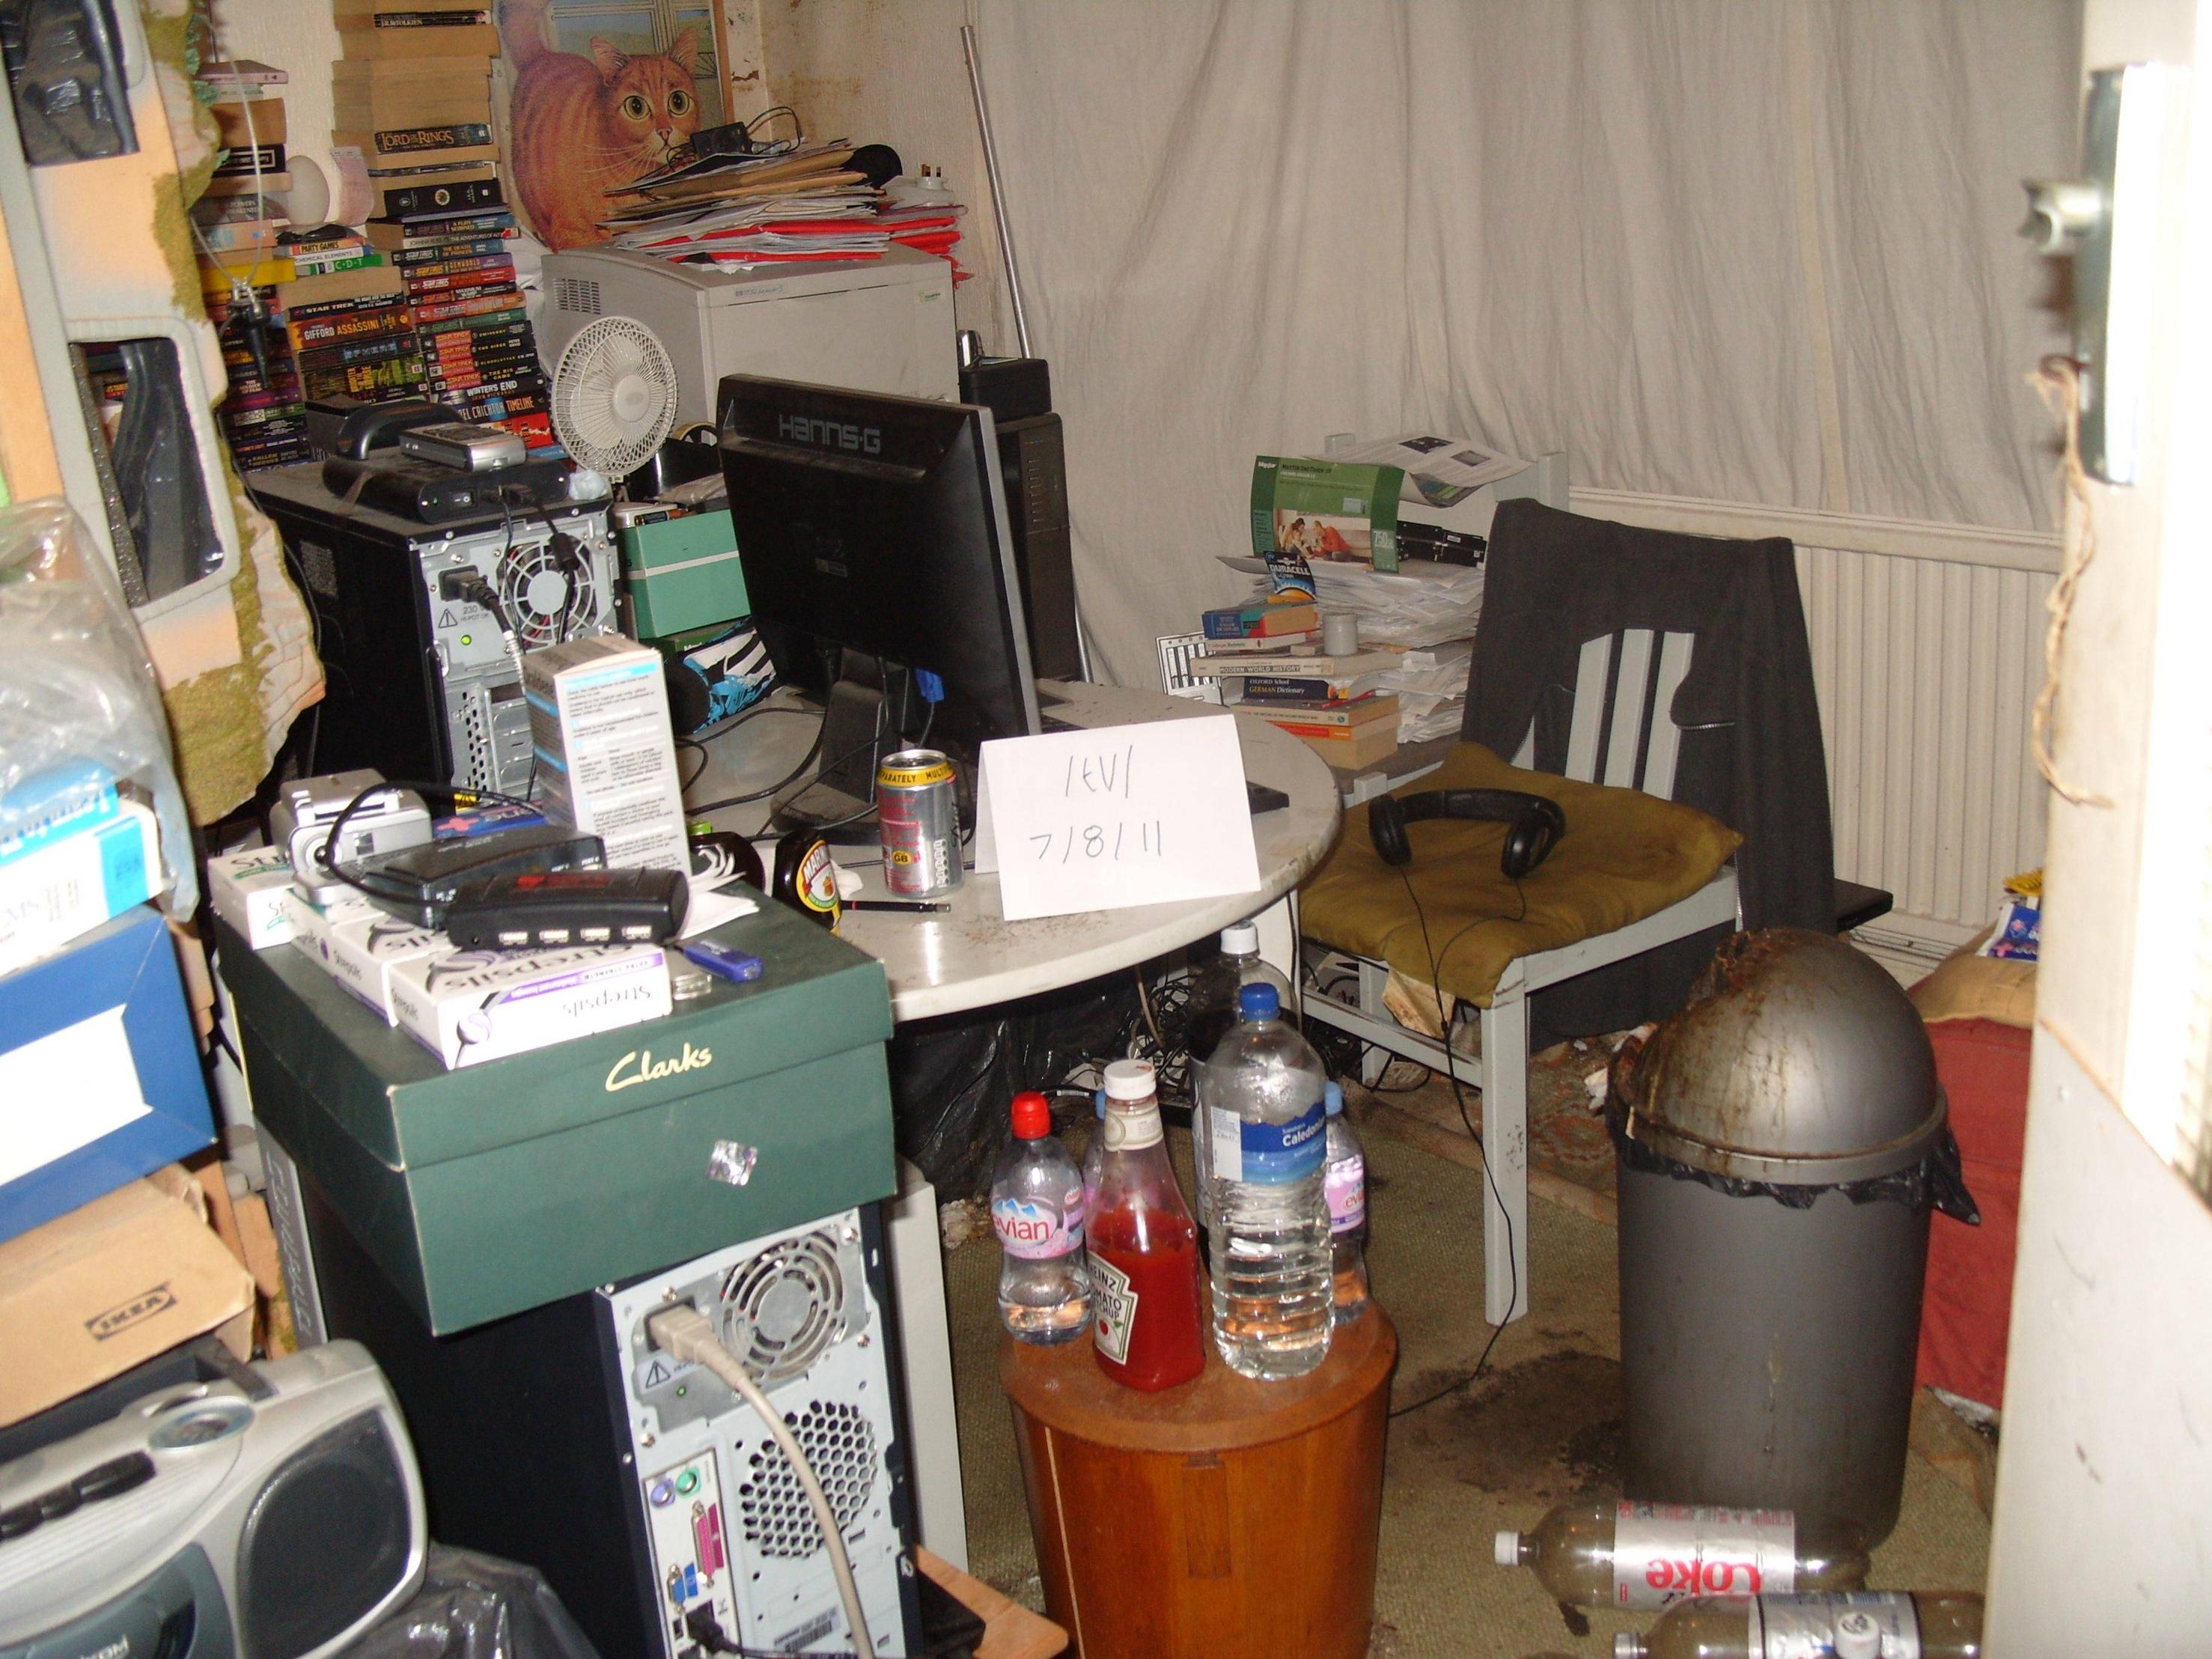 sad and disgusting gamer rigs - 4channers room - Ini Clarks Enke